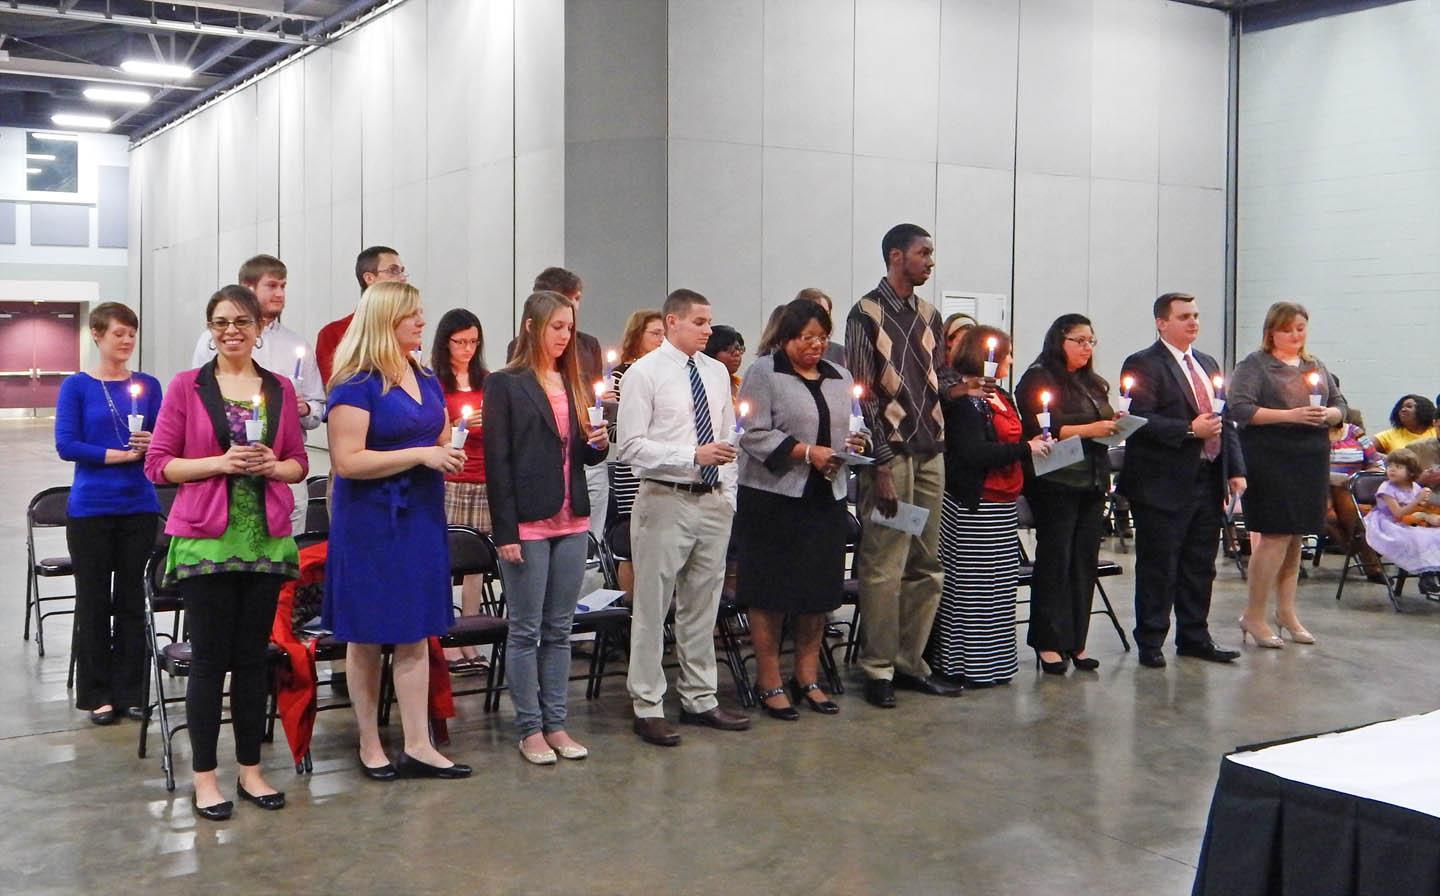 Click to enlarge,  Central Carolina Community College inducted new members into its Beta Sigma Phi Chapter of the Phi Theta Kappa International Honor Society at a ceremony Feb. 25 in the Dennis A. Wicker Civic Center. PTK is the official honor society for two-year colleges and the largest honor society in American higher education. During the ceremony, the inductees lit candles, symbolizing knowledge, and pledged themselves to academic excellence, service, and leadership. For more information about Phi Theta Kappa at <a href='http://nzusojb.lookforstudies.com'>推荐正规买球平台</a>, visit the college's Web site, nzusojb.lookforstudies.com, click on 'A-Z Index, then 'P' for Phi Theta Kappa Honor Society. 